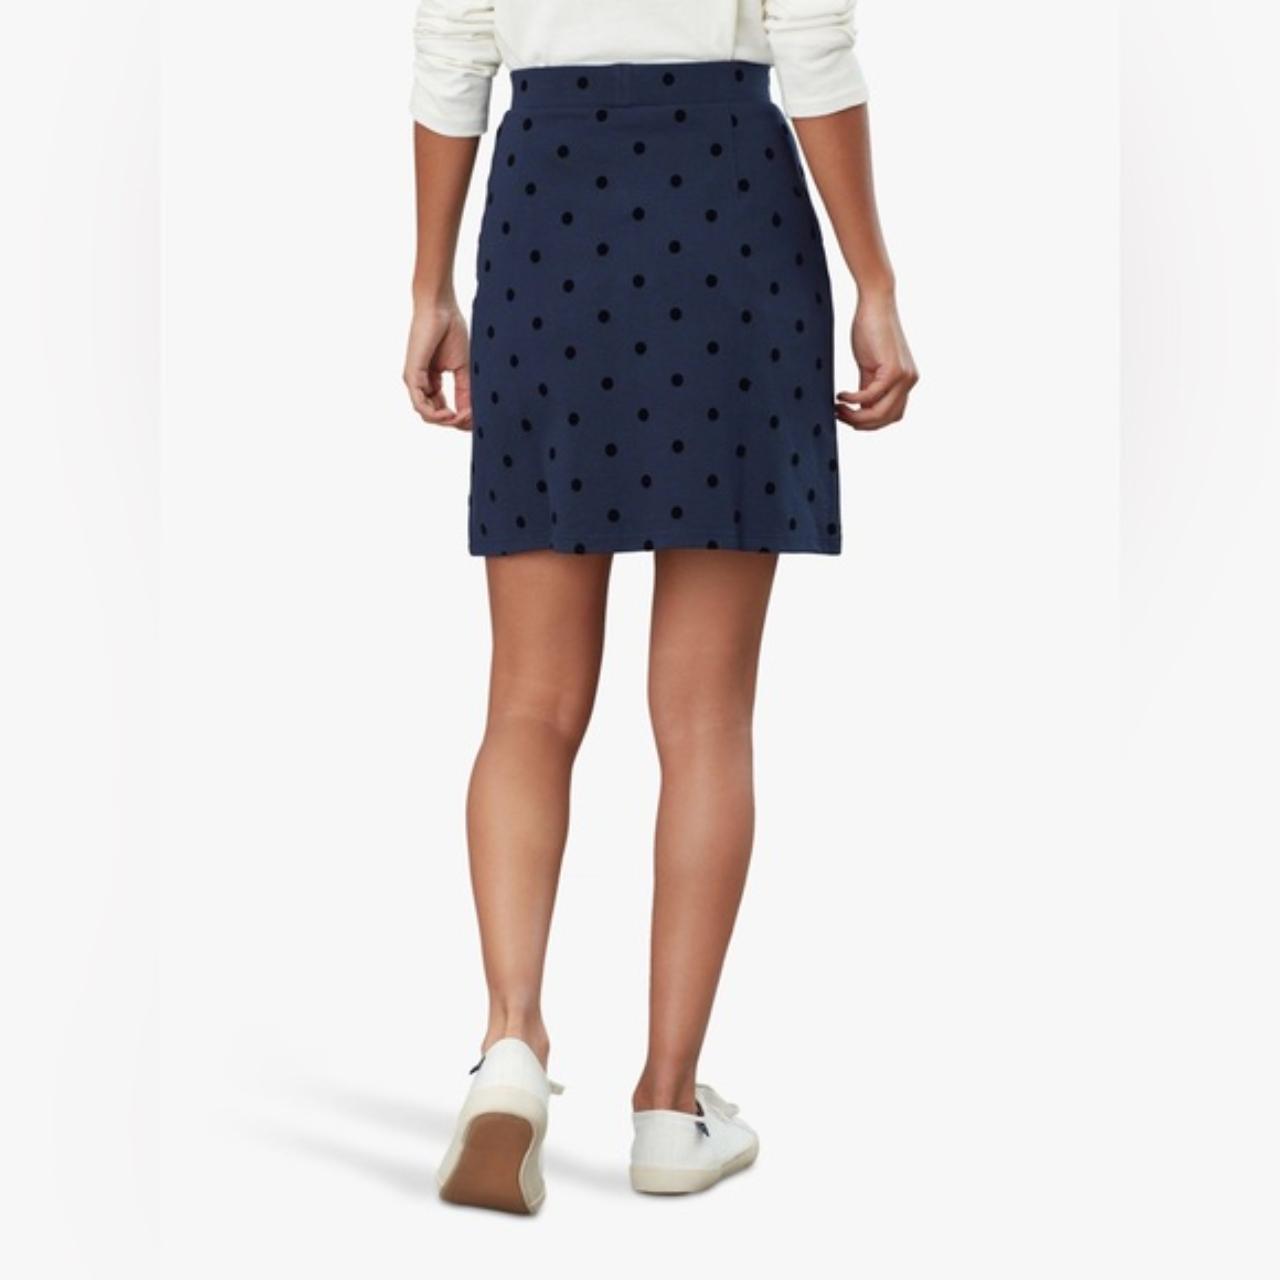 Joules Women's Black and Blue Skirt